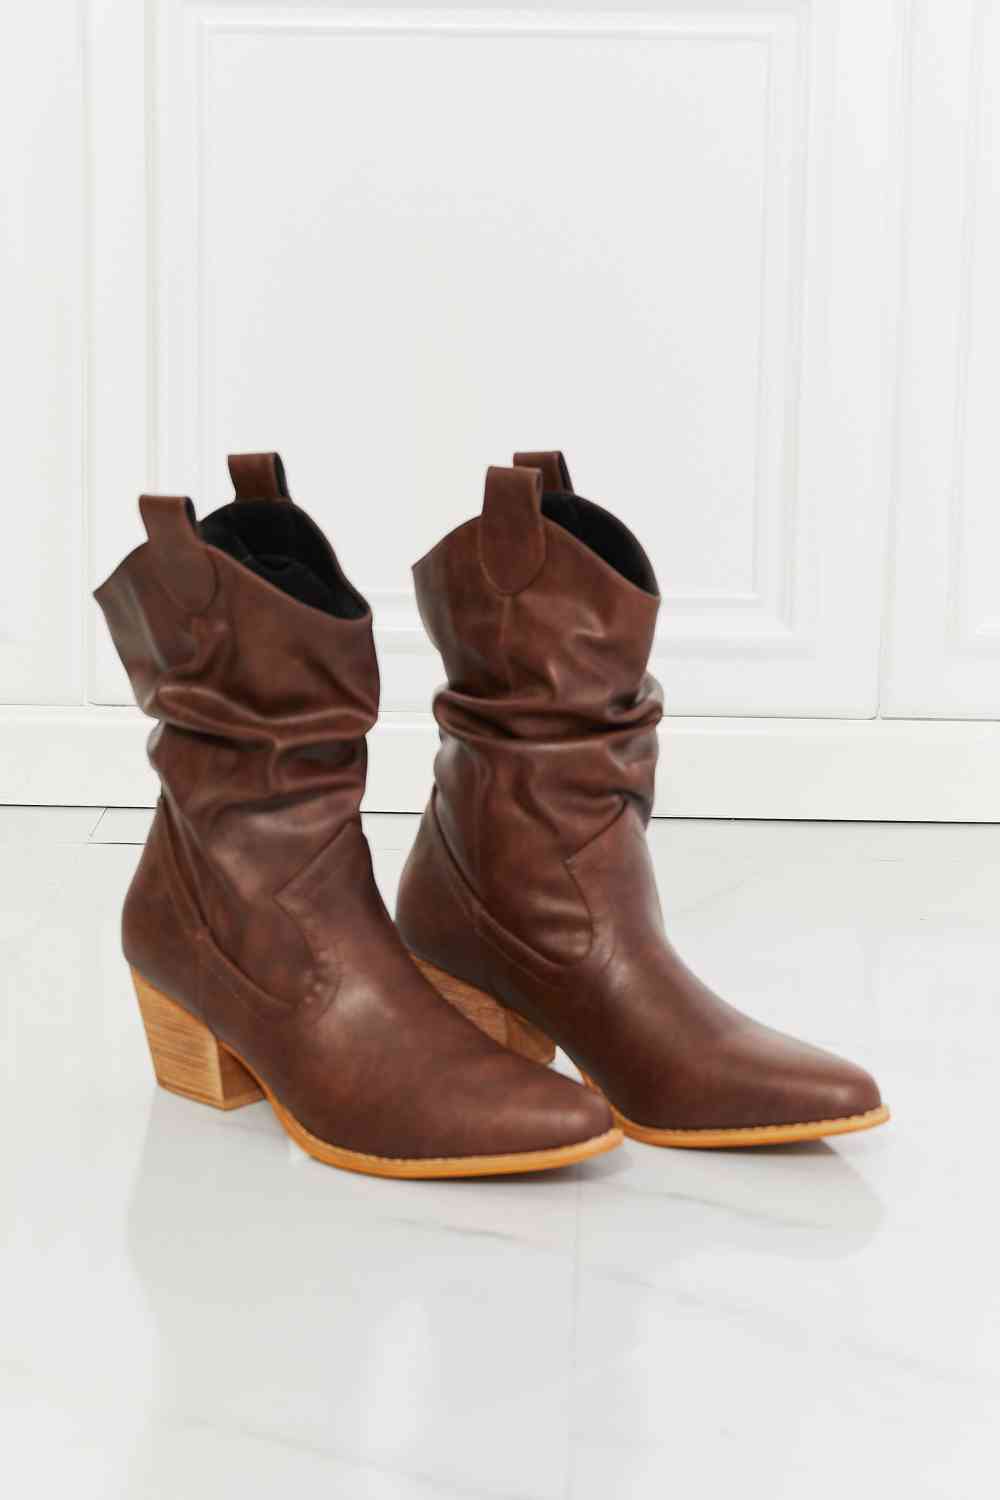 MMShoes Better in Texas Scrunch Cowboy Boots in Brown - lolaluxeshop